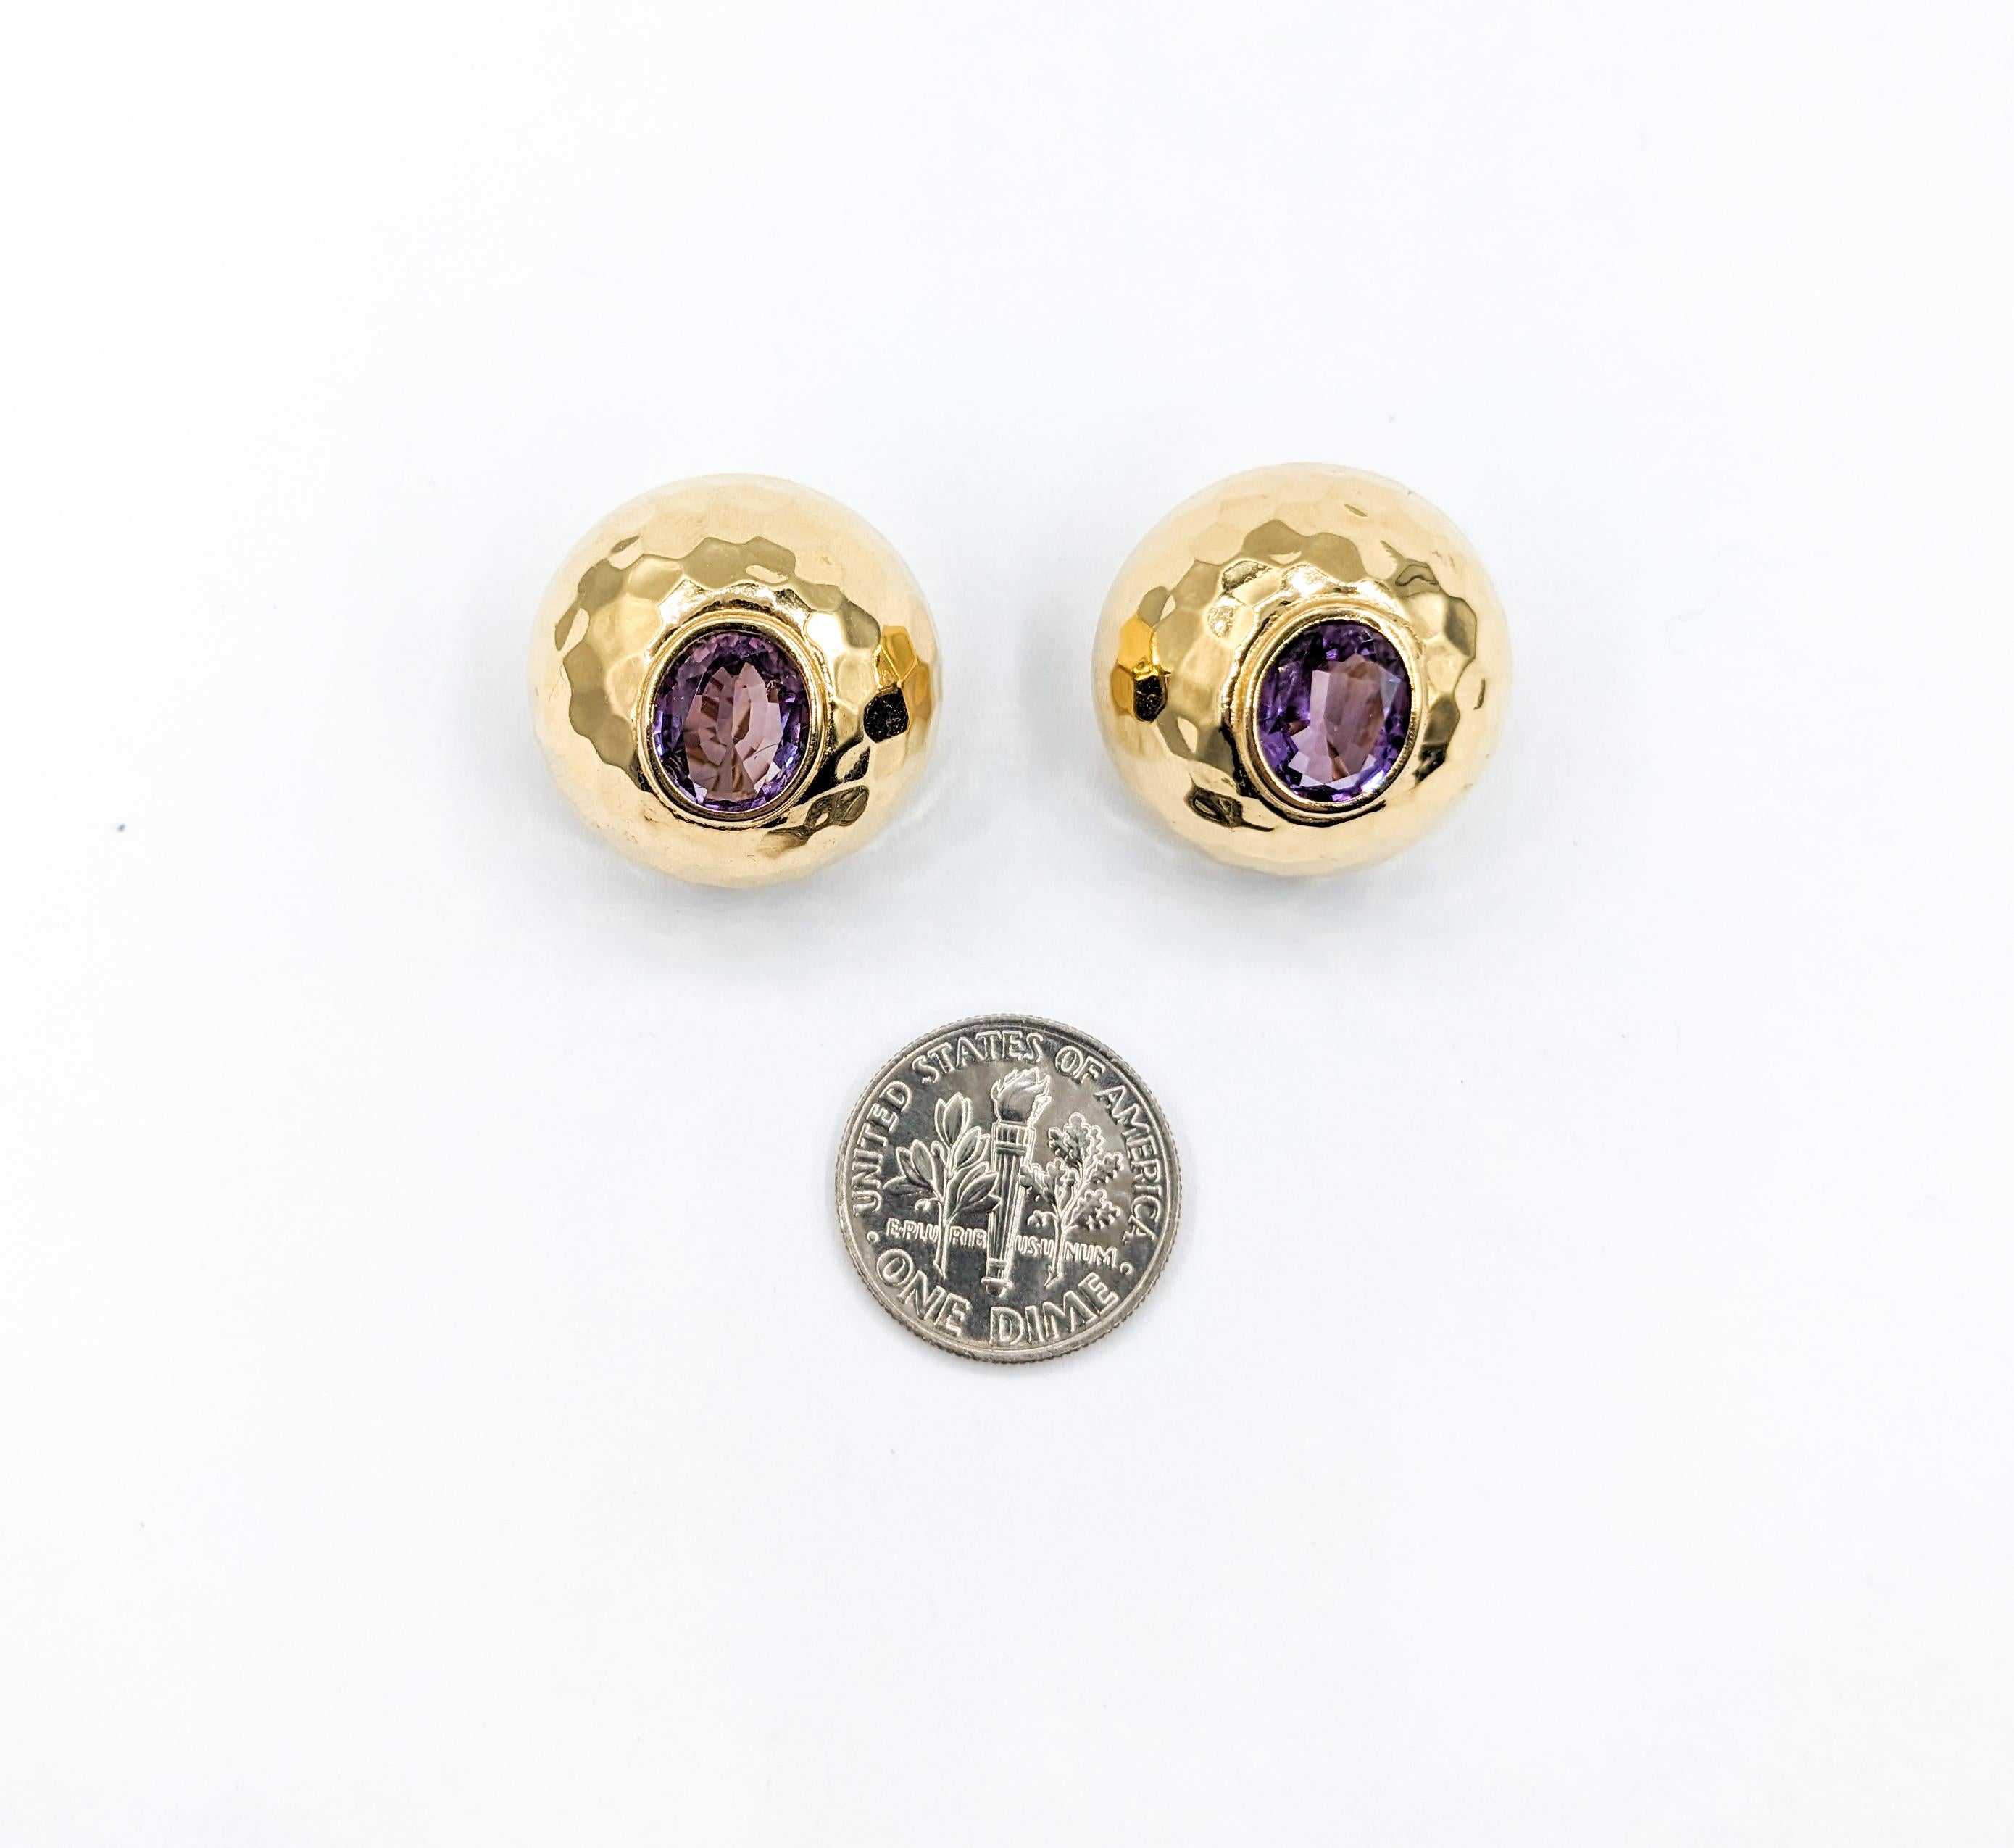 Vintage Amethyst Hammered Clip On Earrings in 14K Gold

Elevate your vintage style with these exquisite clip-on earrings, masterfully crafted in radiant 14-karat yellow gold. These earrings feature a beautiful hammered texture and are each adorned